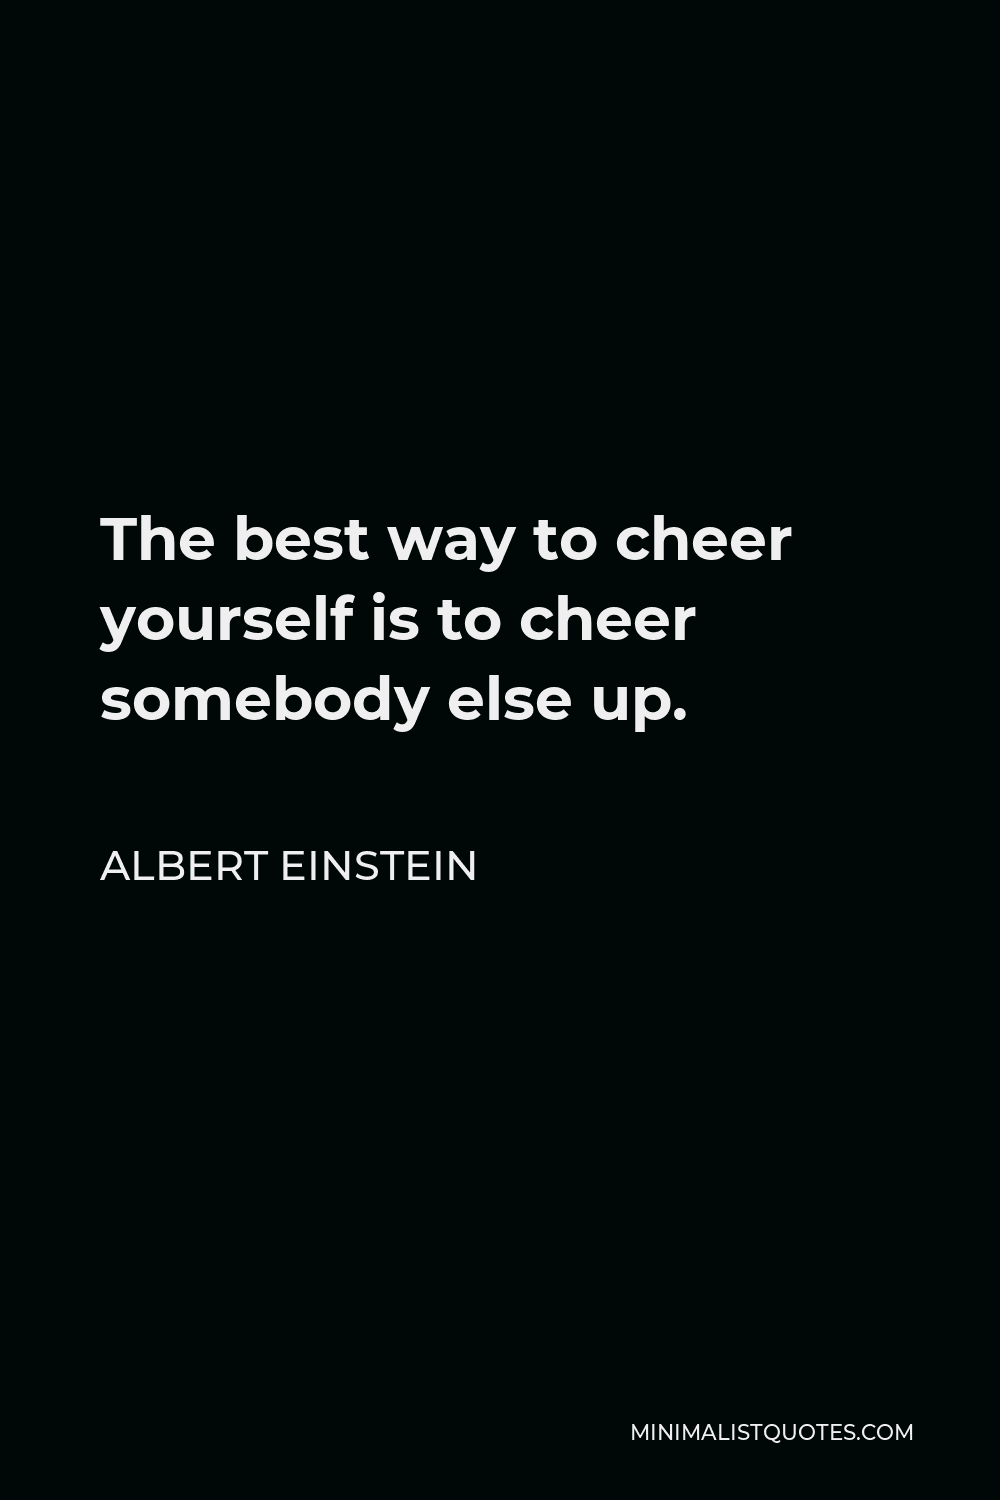 Albert Einstein Quote - The best way to cheer yourself is to cheer somebody else up.